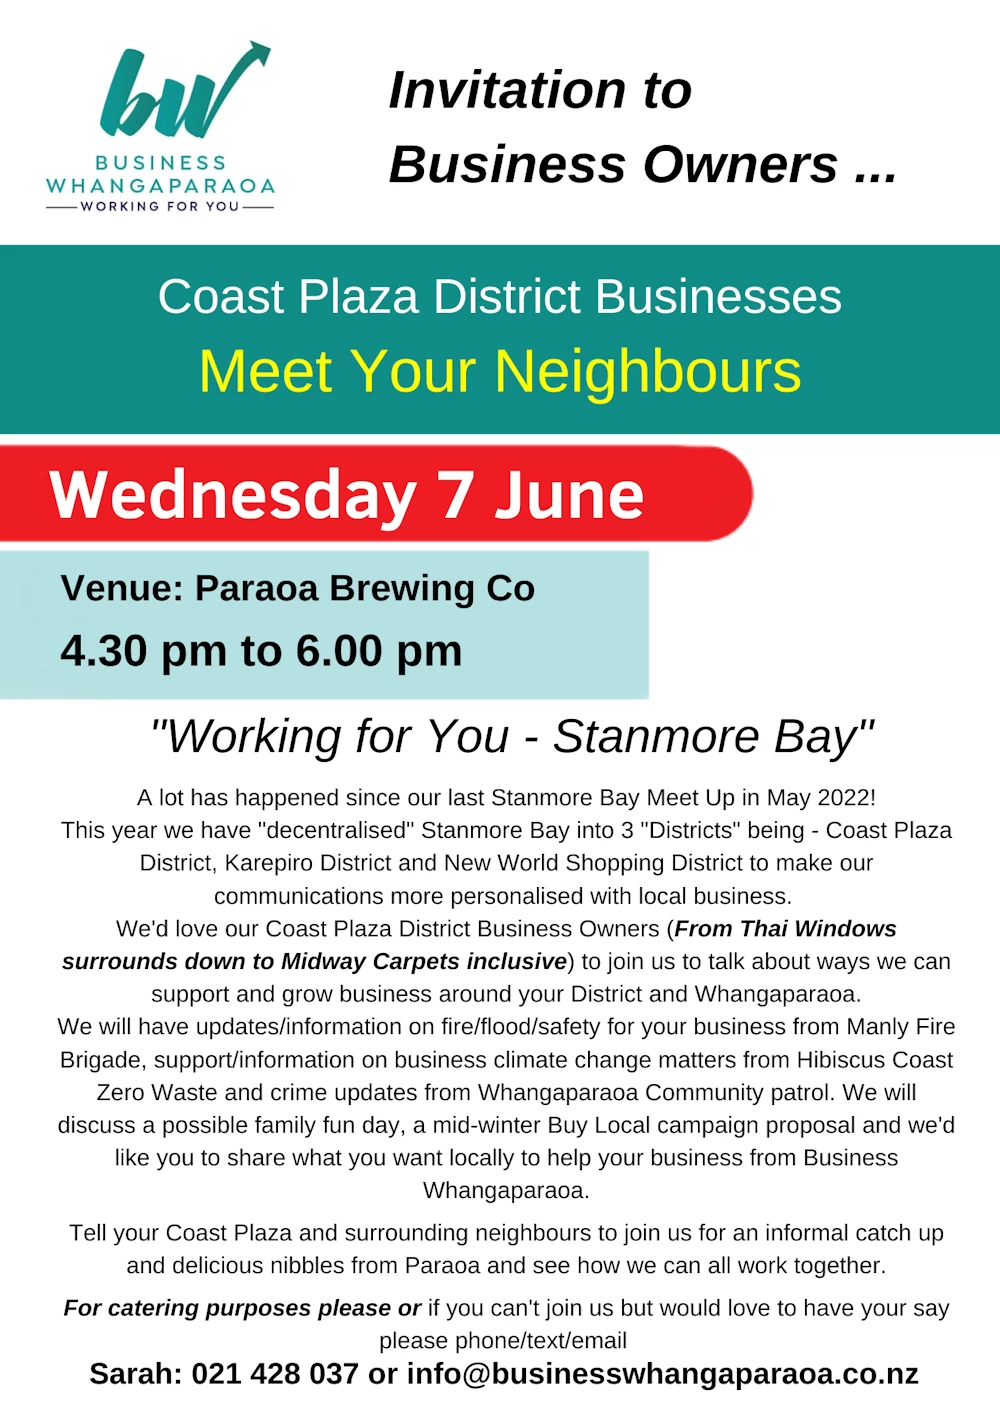 Stanmore Bay meet up